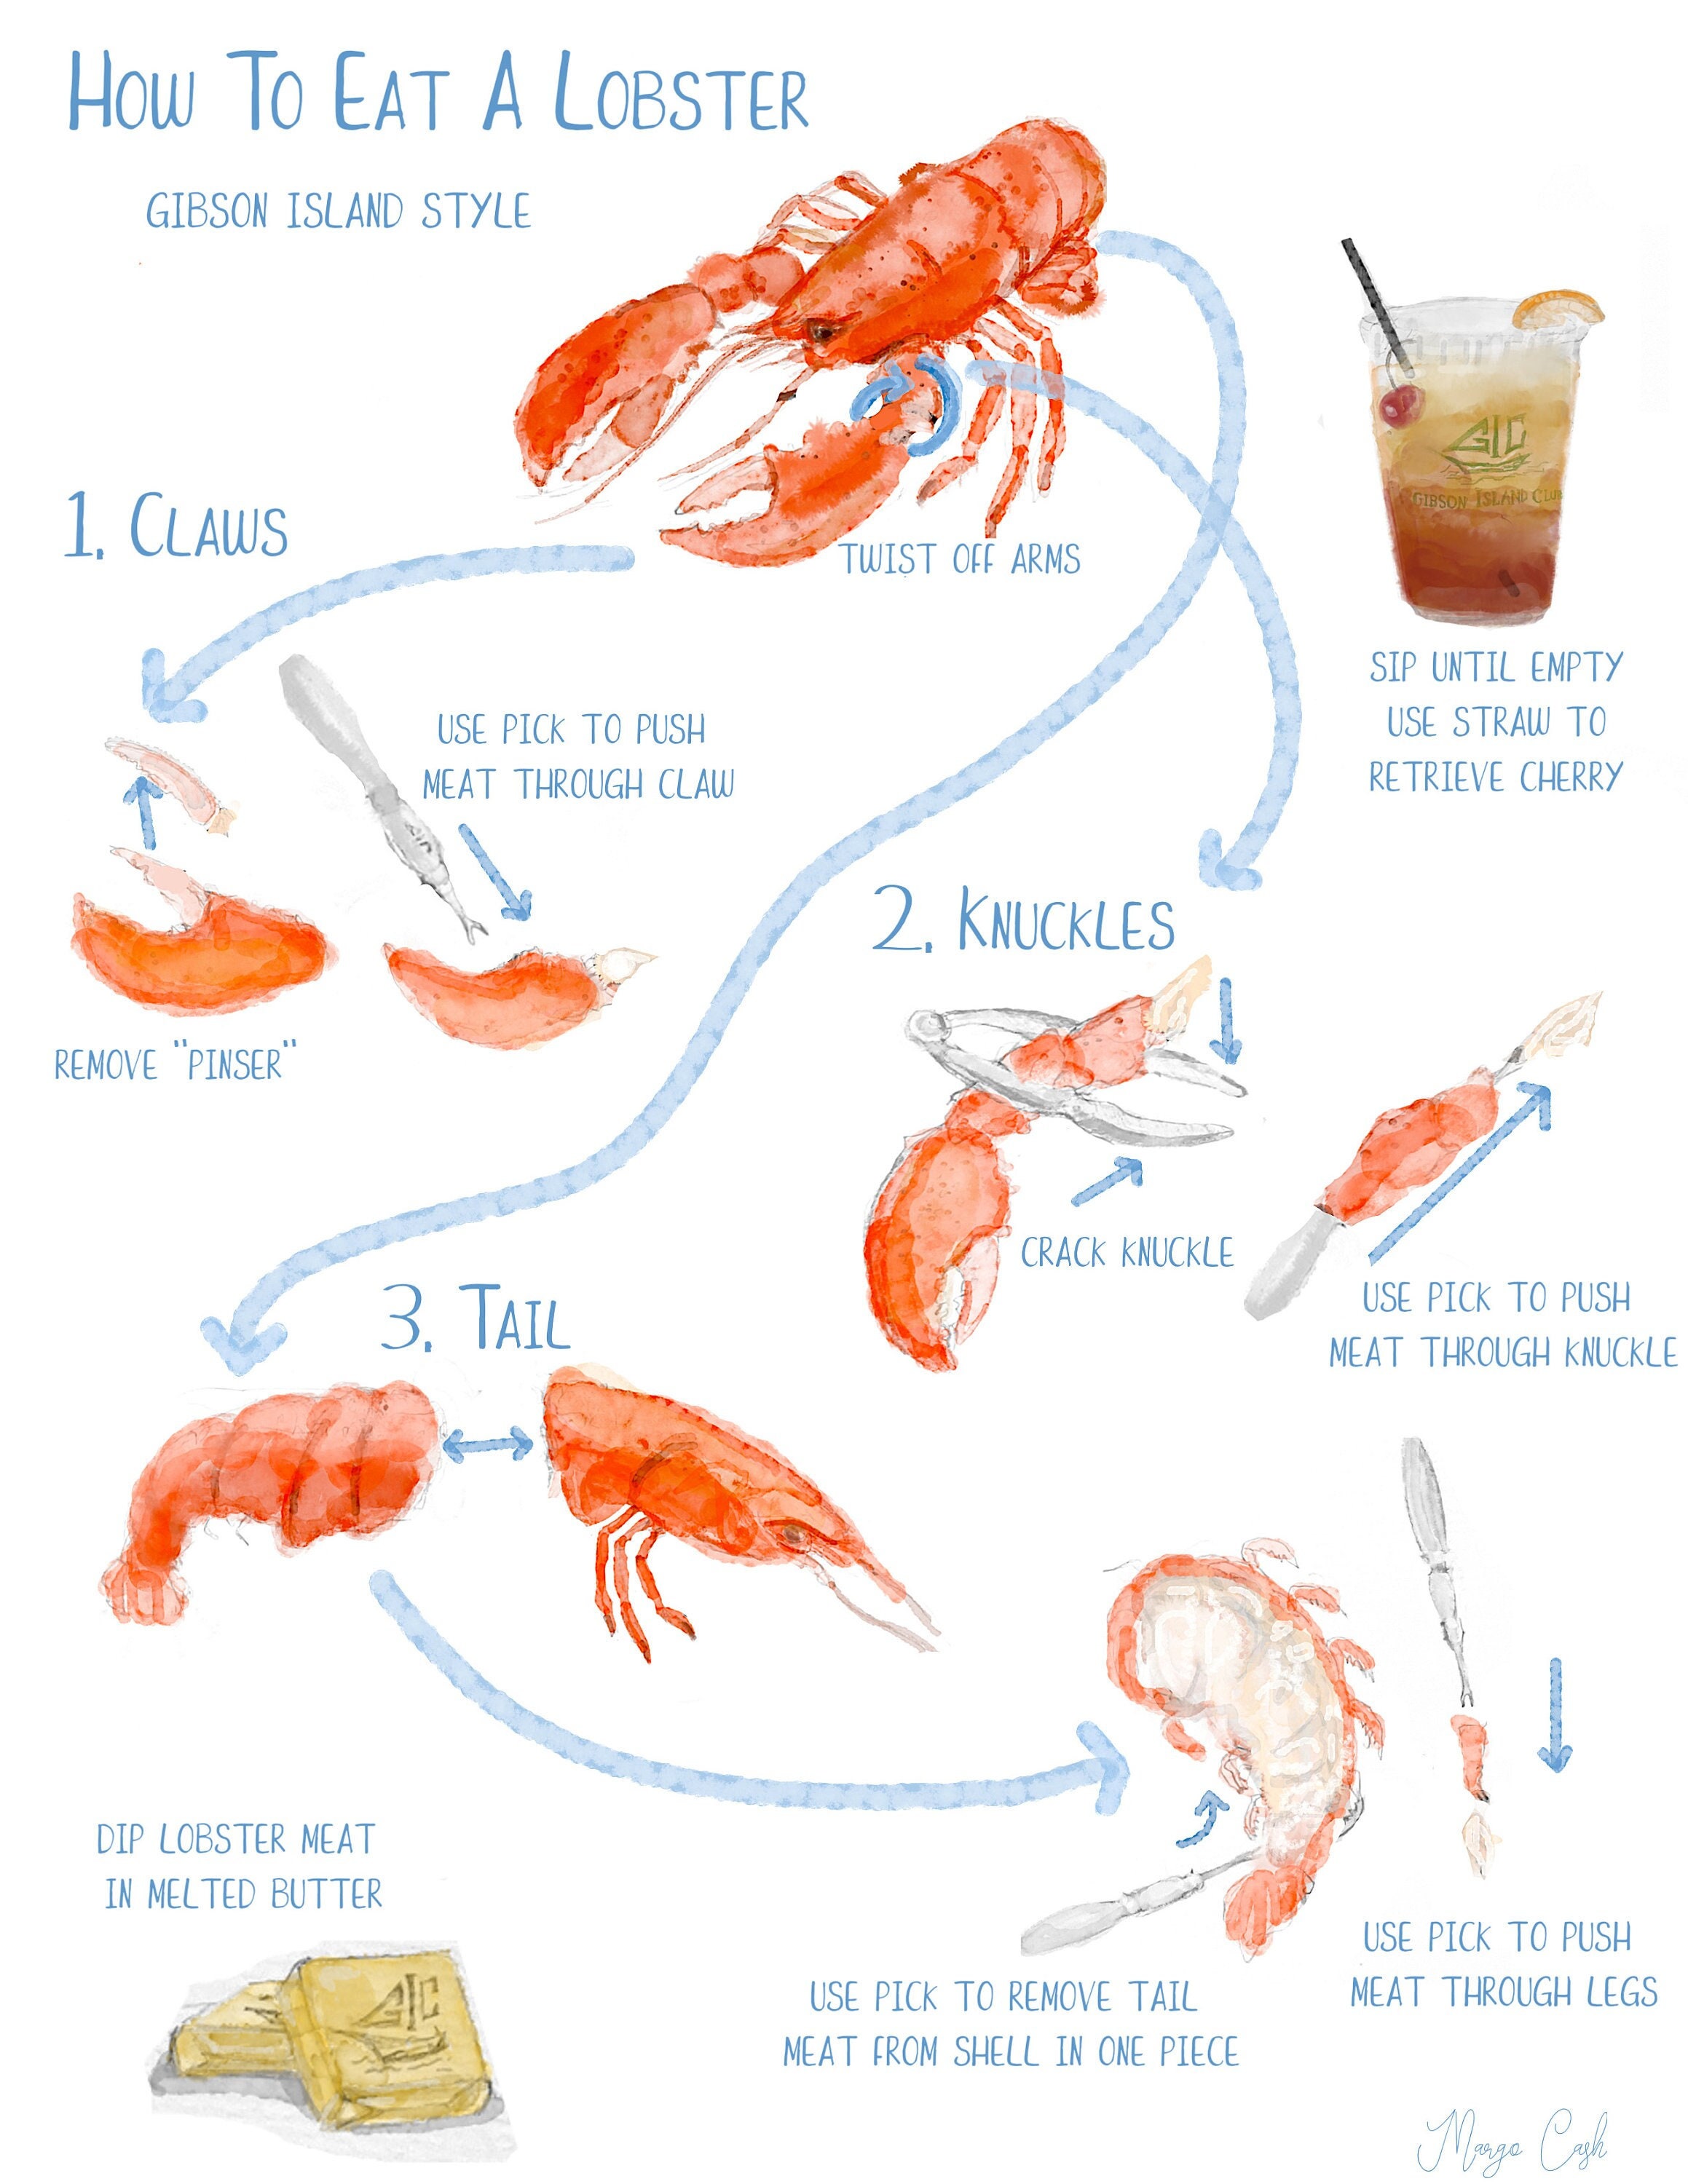 How To Eat a Lobster - Digital